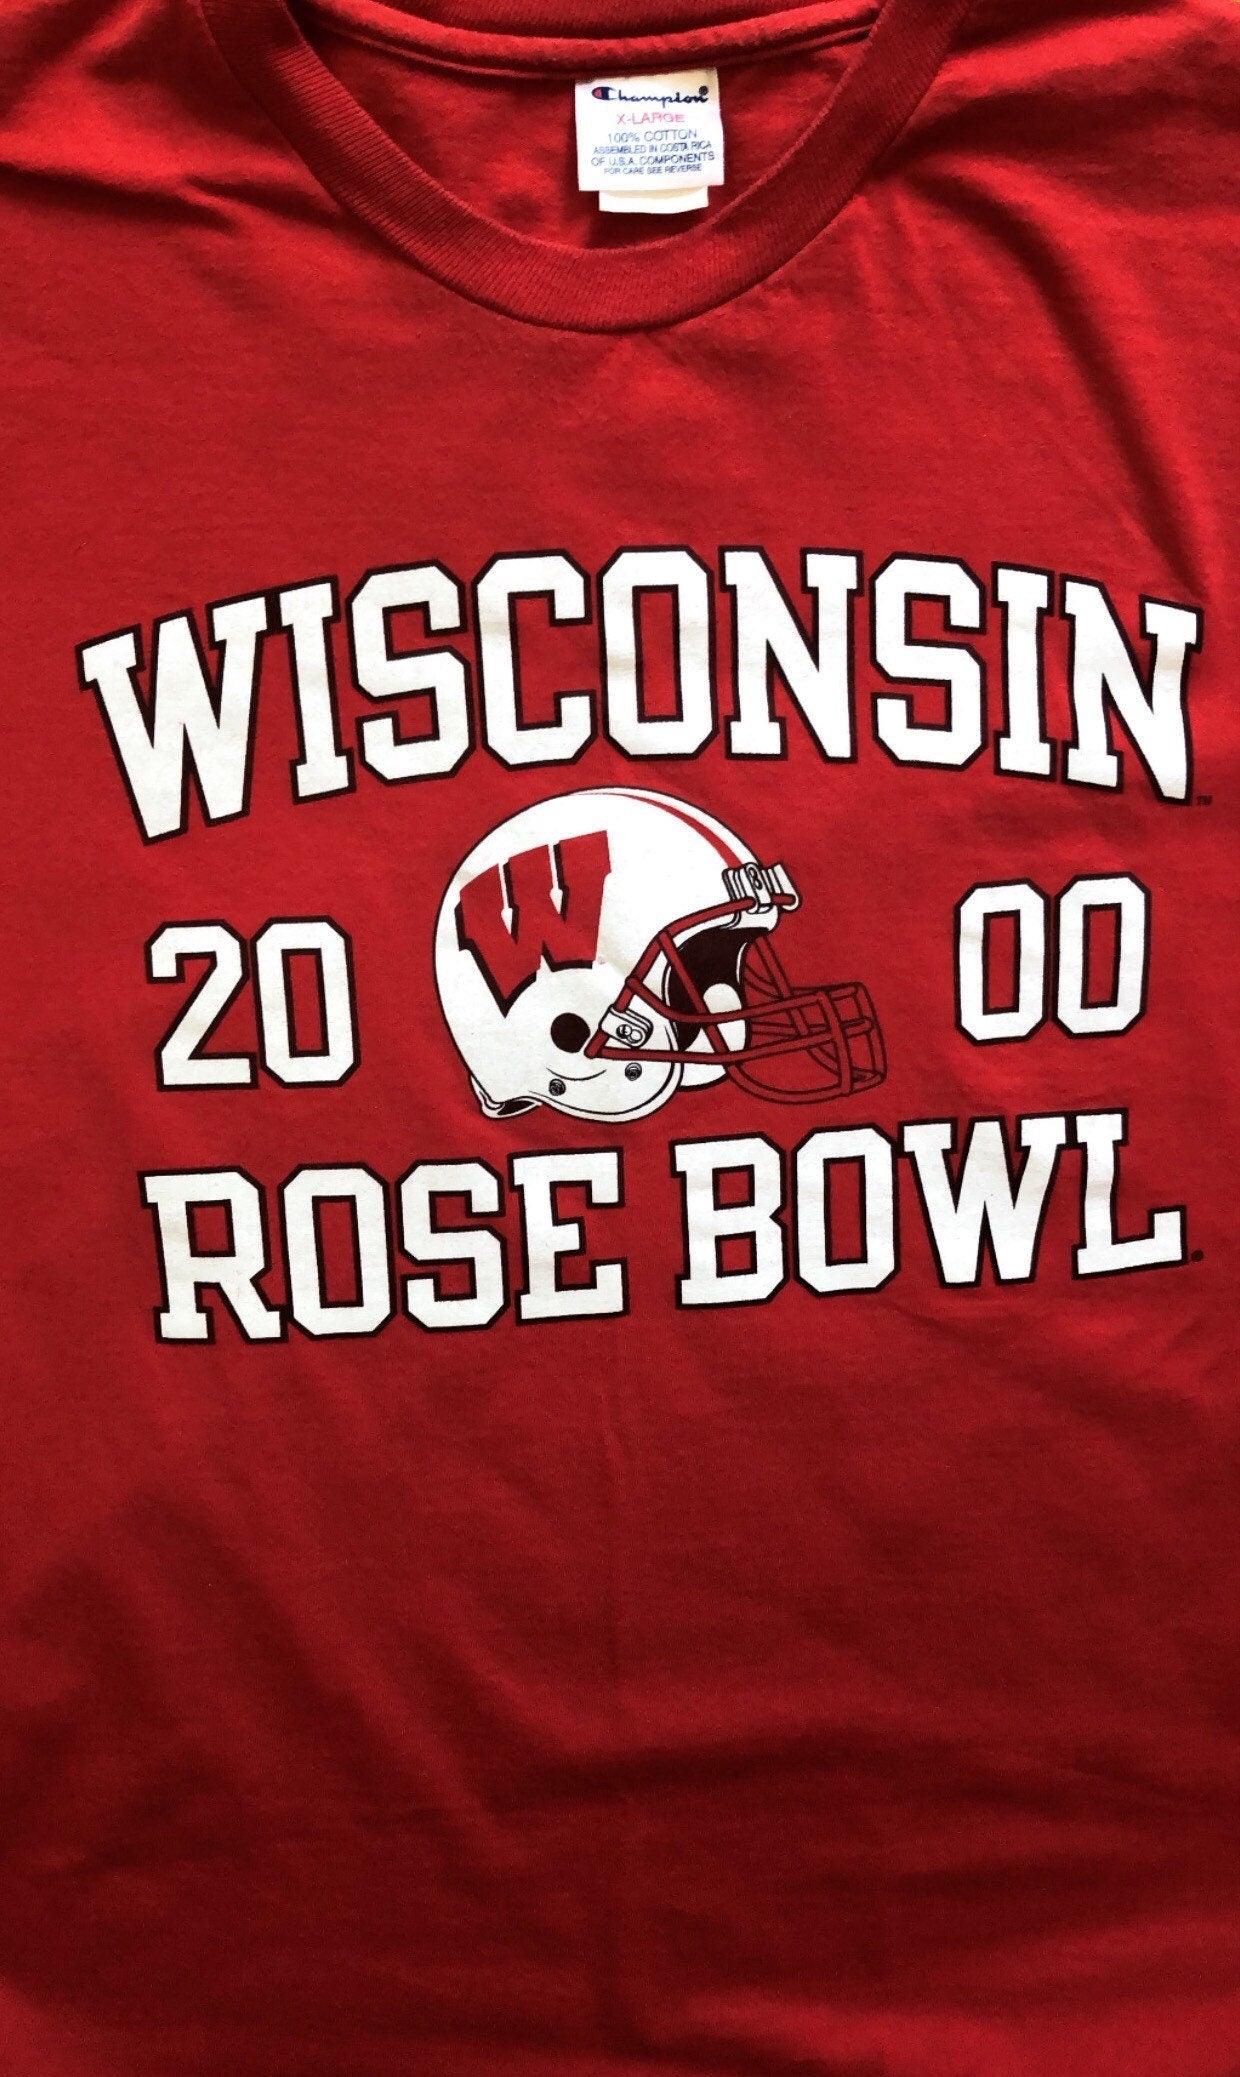 2000 Rose Bowl Wisconsin Badgers 100% Cotton CHAMPION T-shirt Size XL